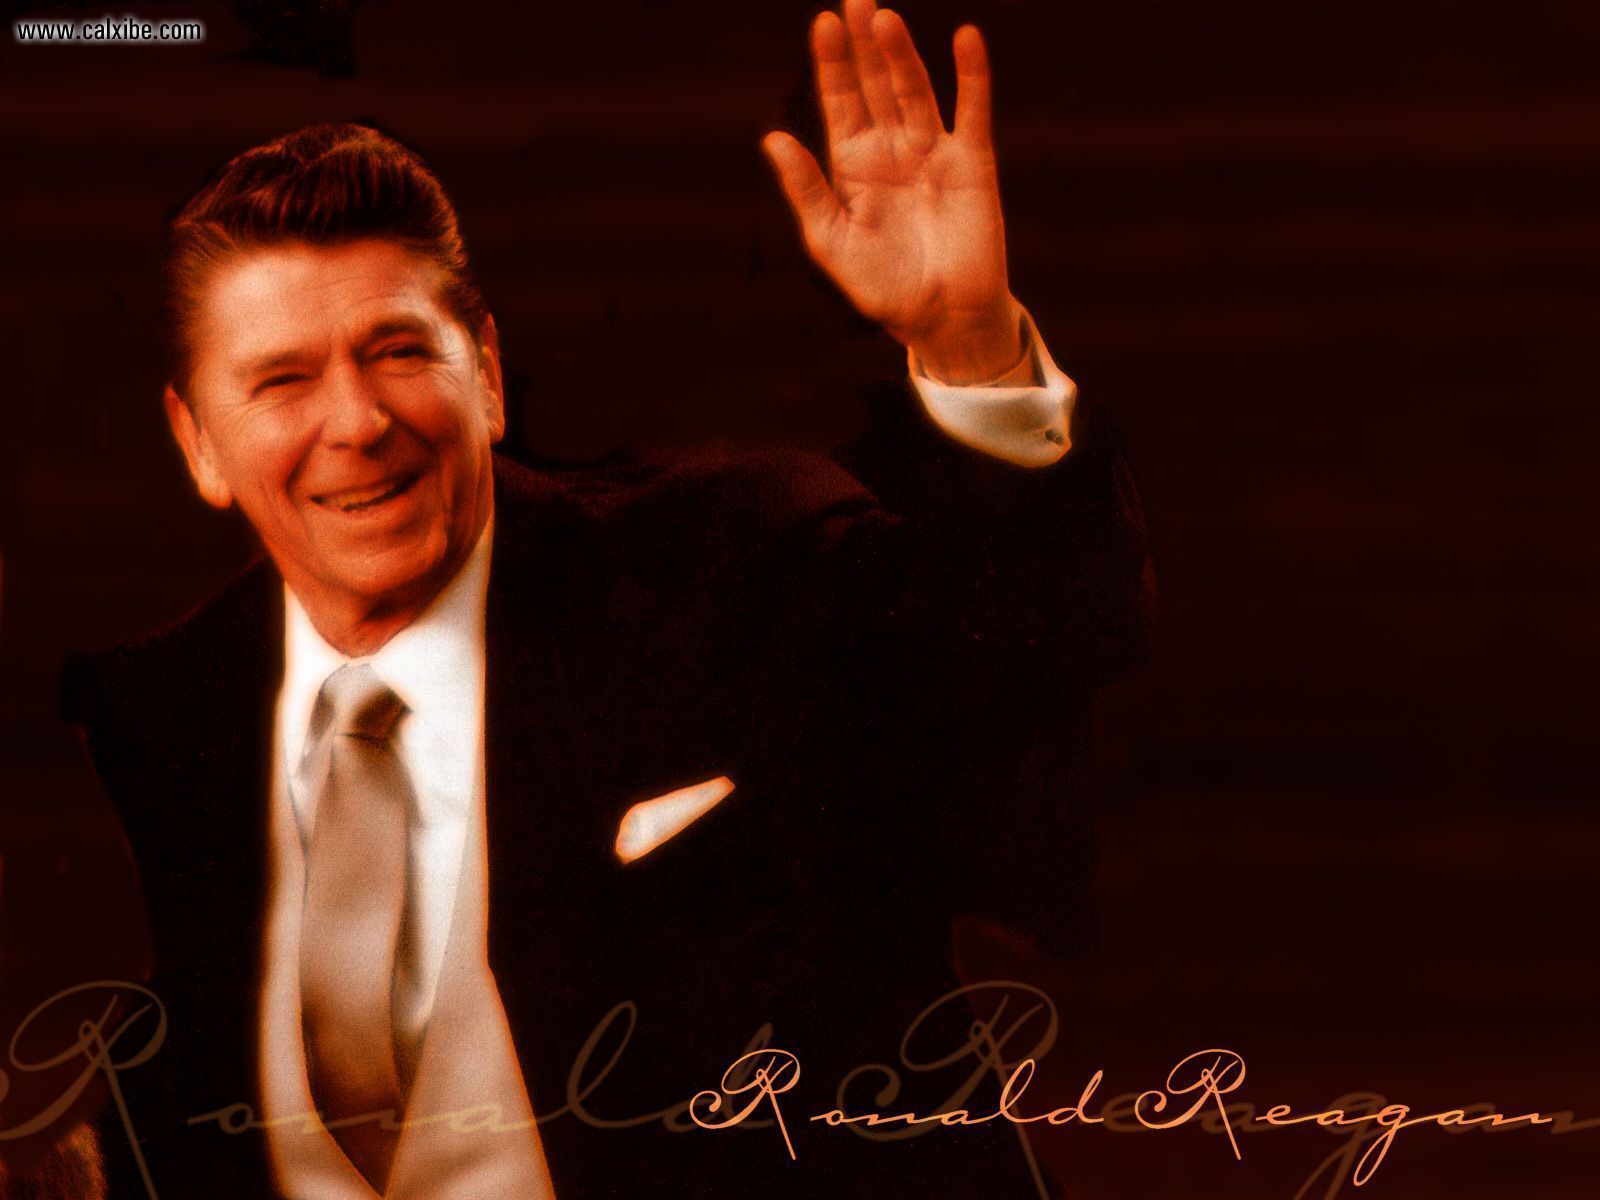 Male Celebrities Ronald Reagan, picture nr. 12707